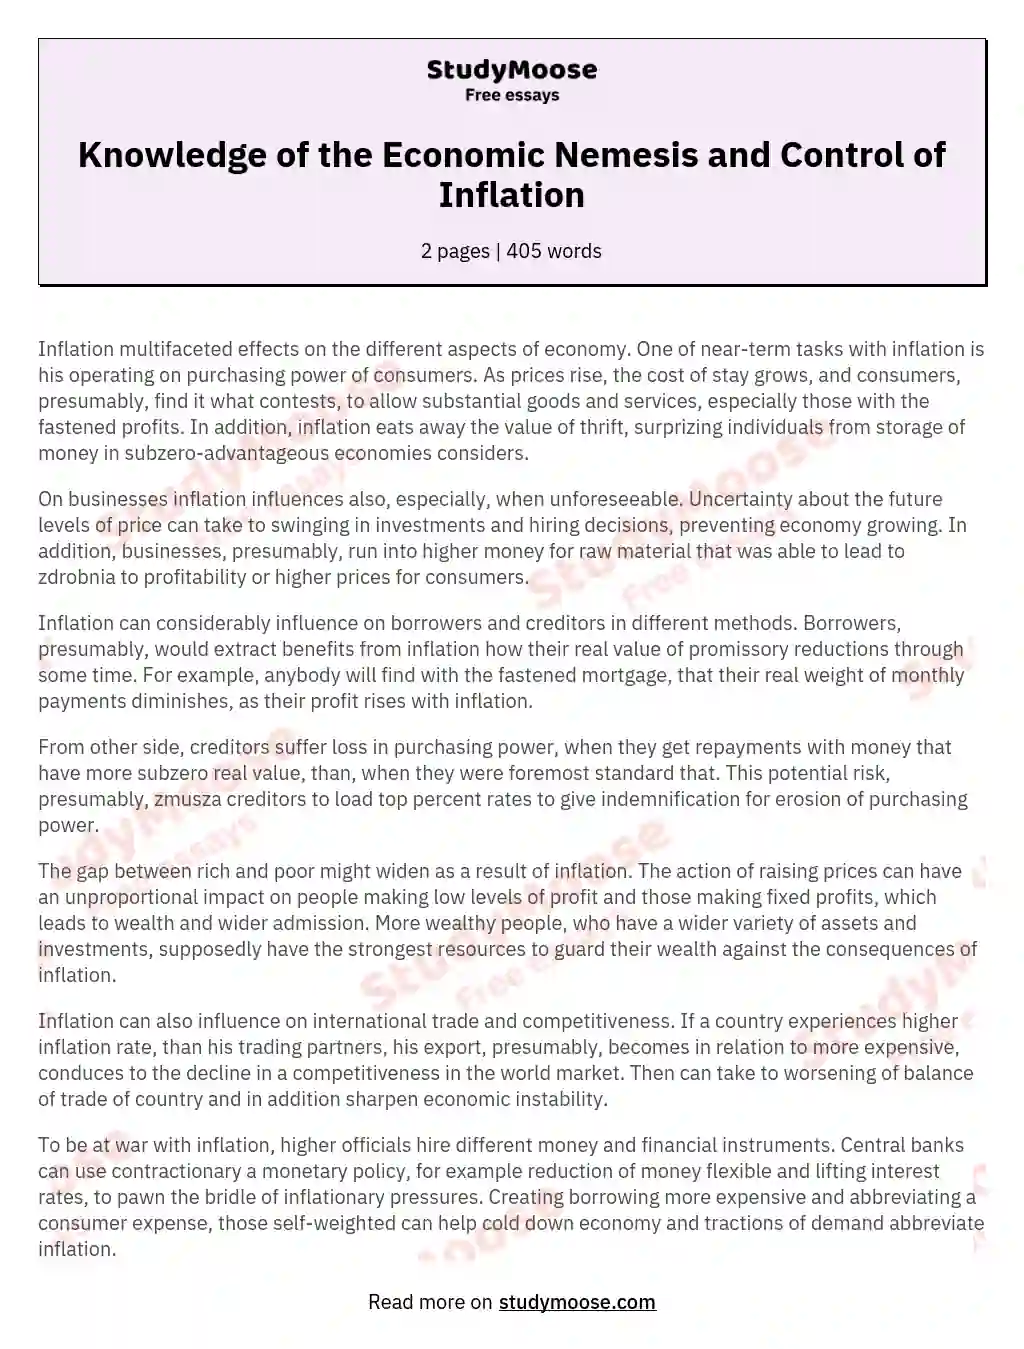 Knowledge of the Economic Nemesis and Control of Inflation essay